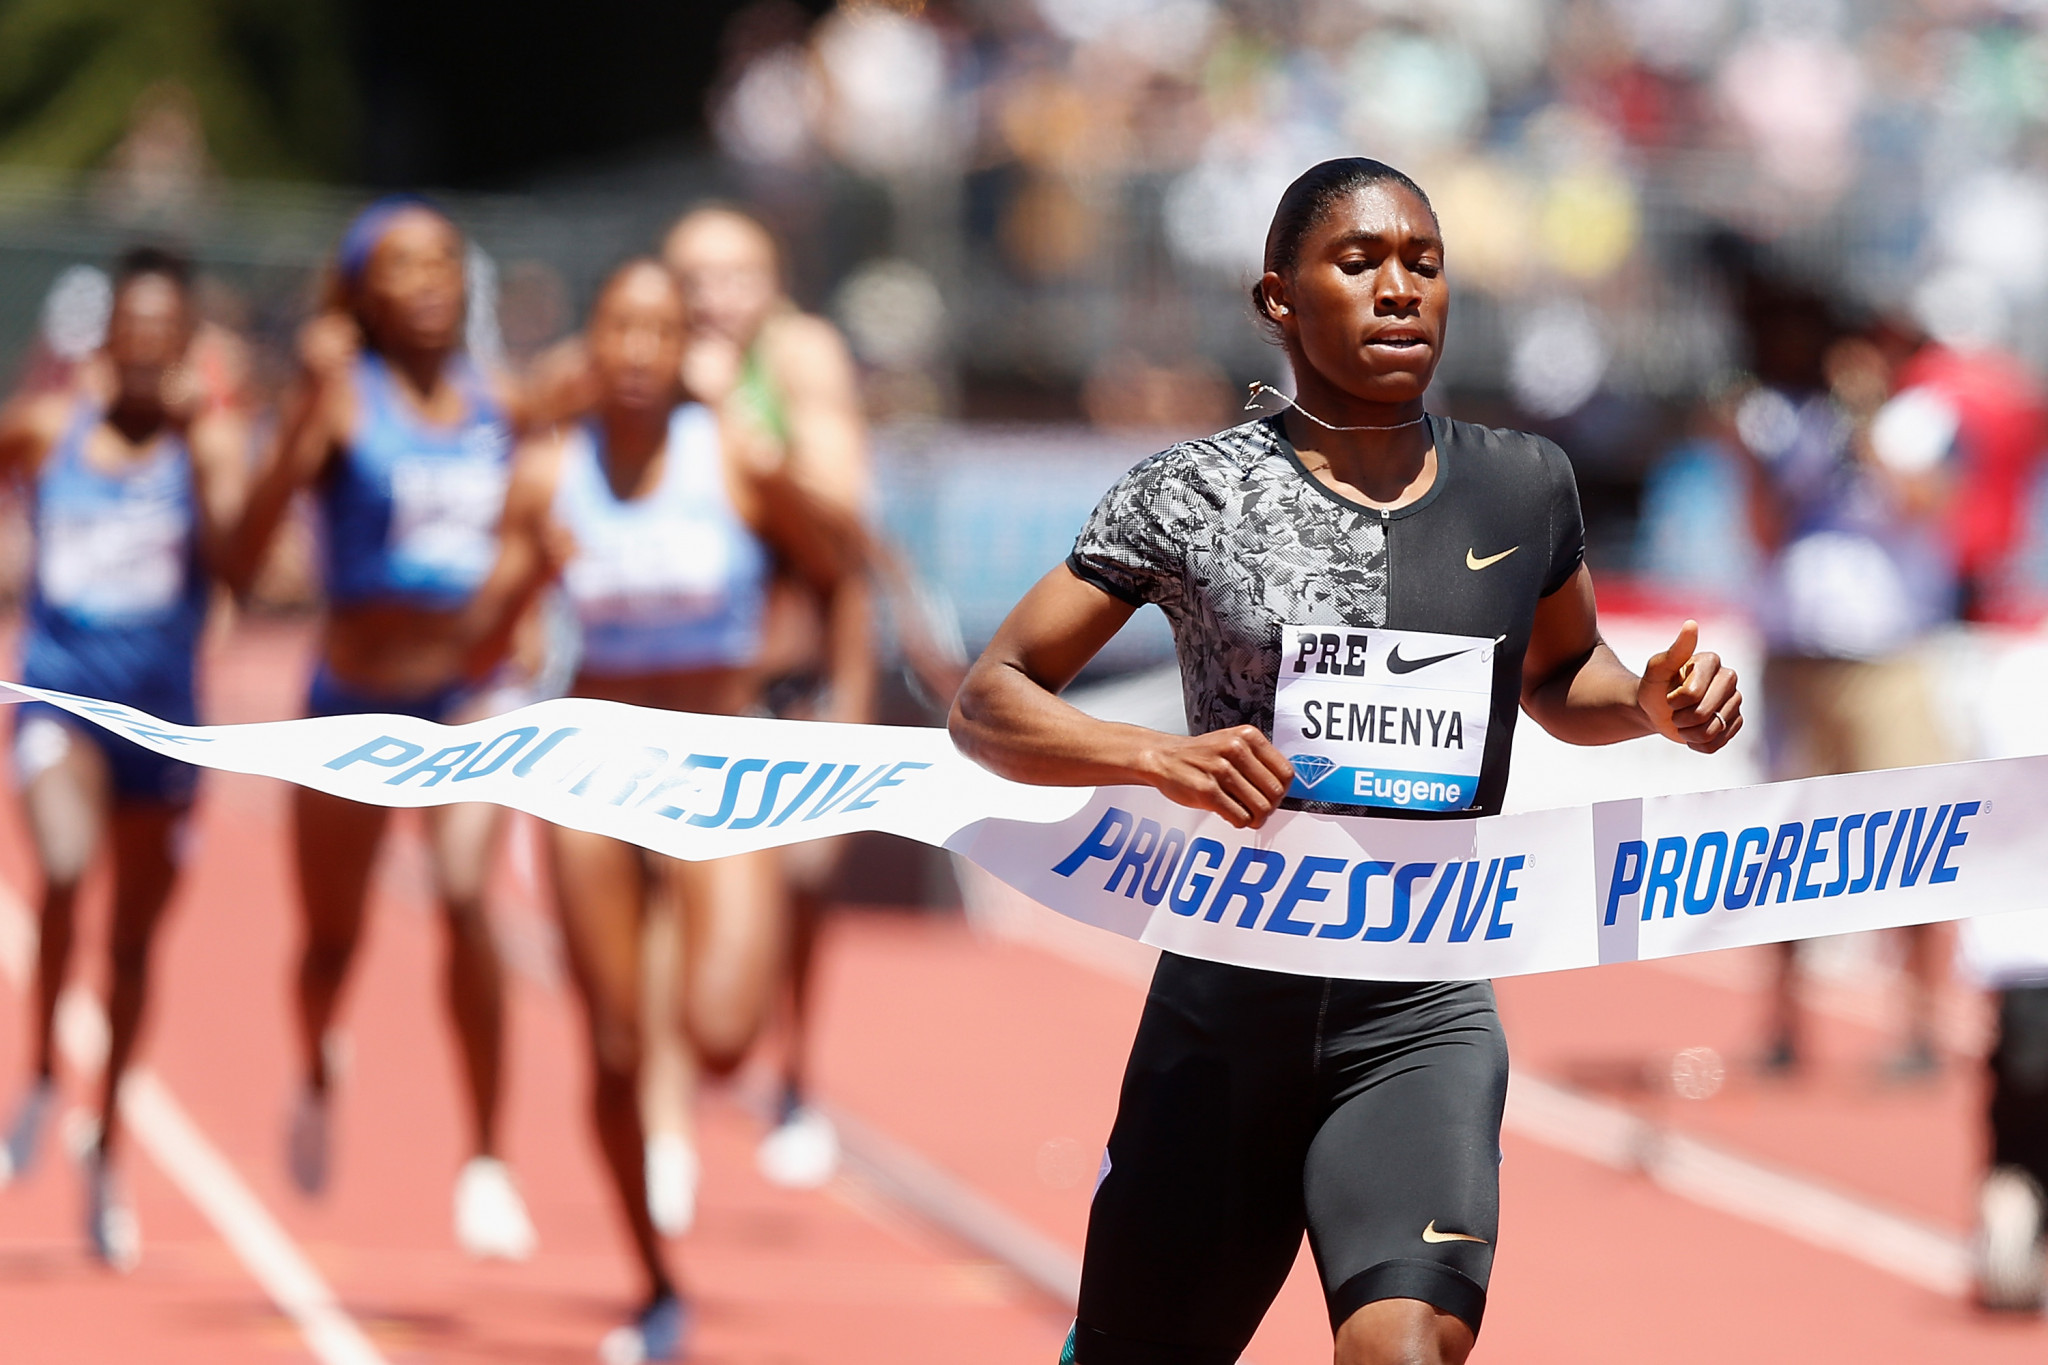 Caster Semenya is hoping to reverse a rule that would force her to take testosterone-suppressing medication to compete in her best events ©Getty Images 